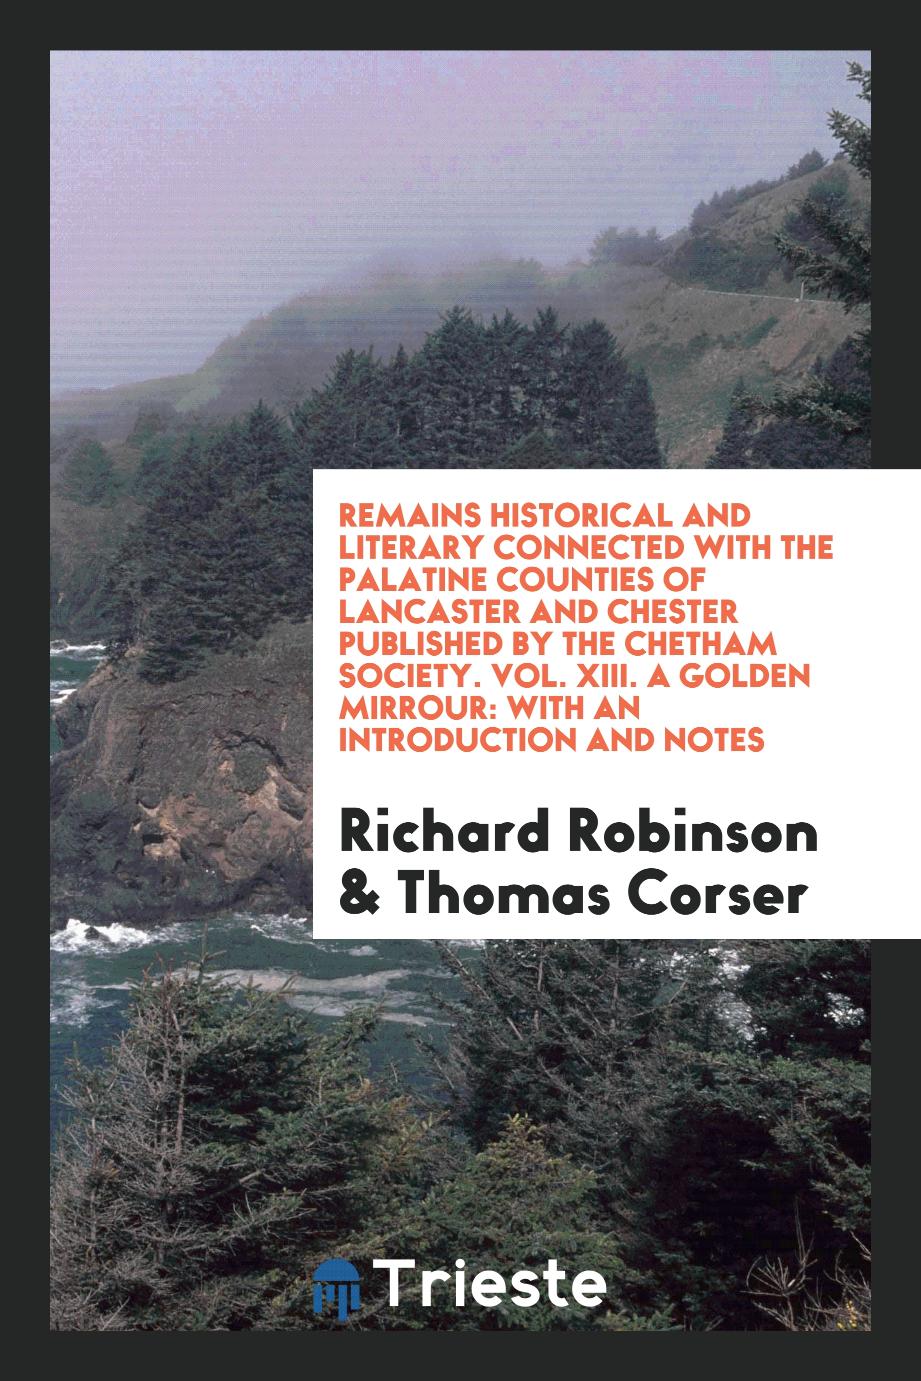 Remains Historical and Literary Connected with the Palatine Counties of Lancaster and Chester Published by the Chetham Society. Vol. XIII. A Golden Mirrour: With an Introduction and Notes